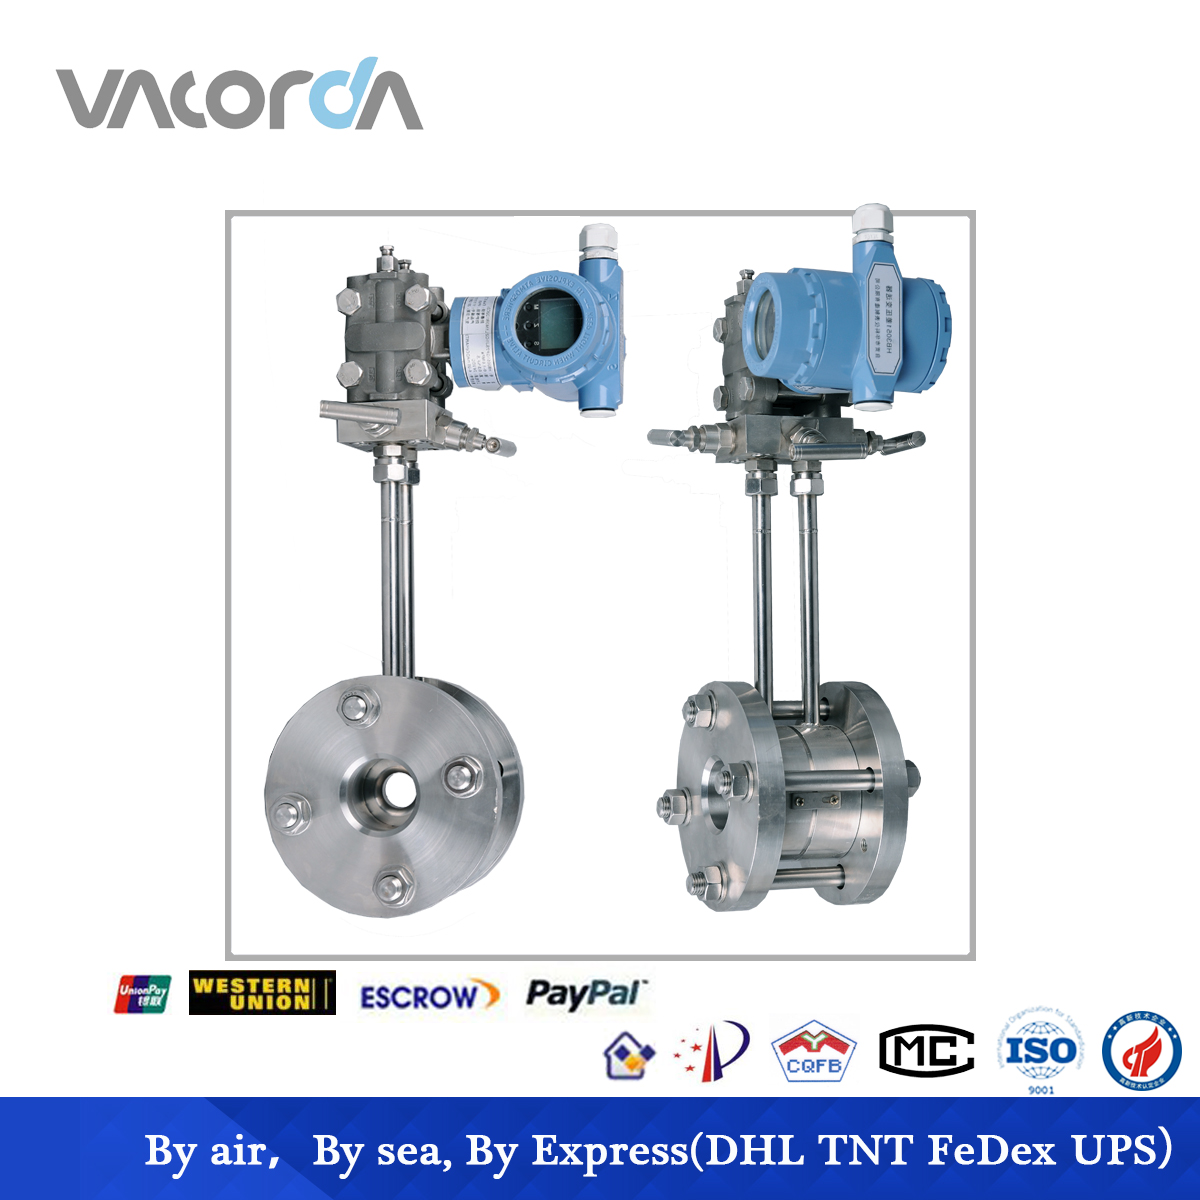 How to choose the differential pressure value of orifice flowmeter